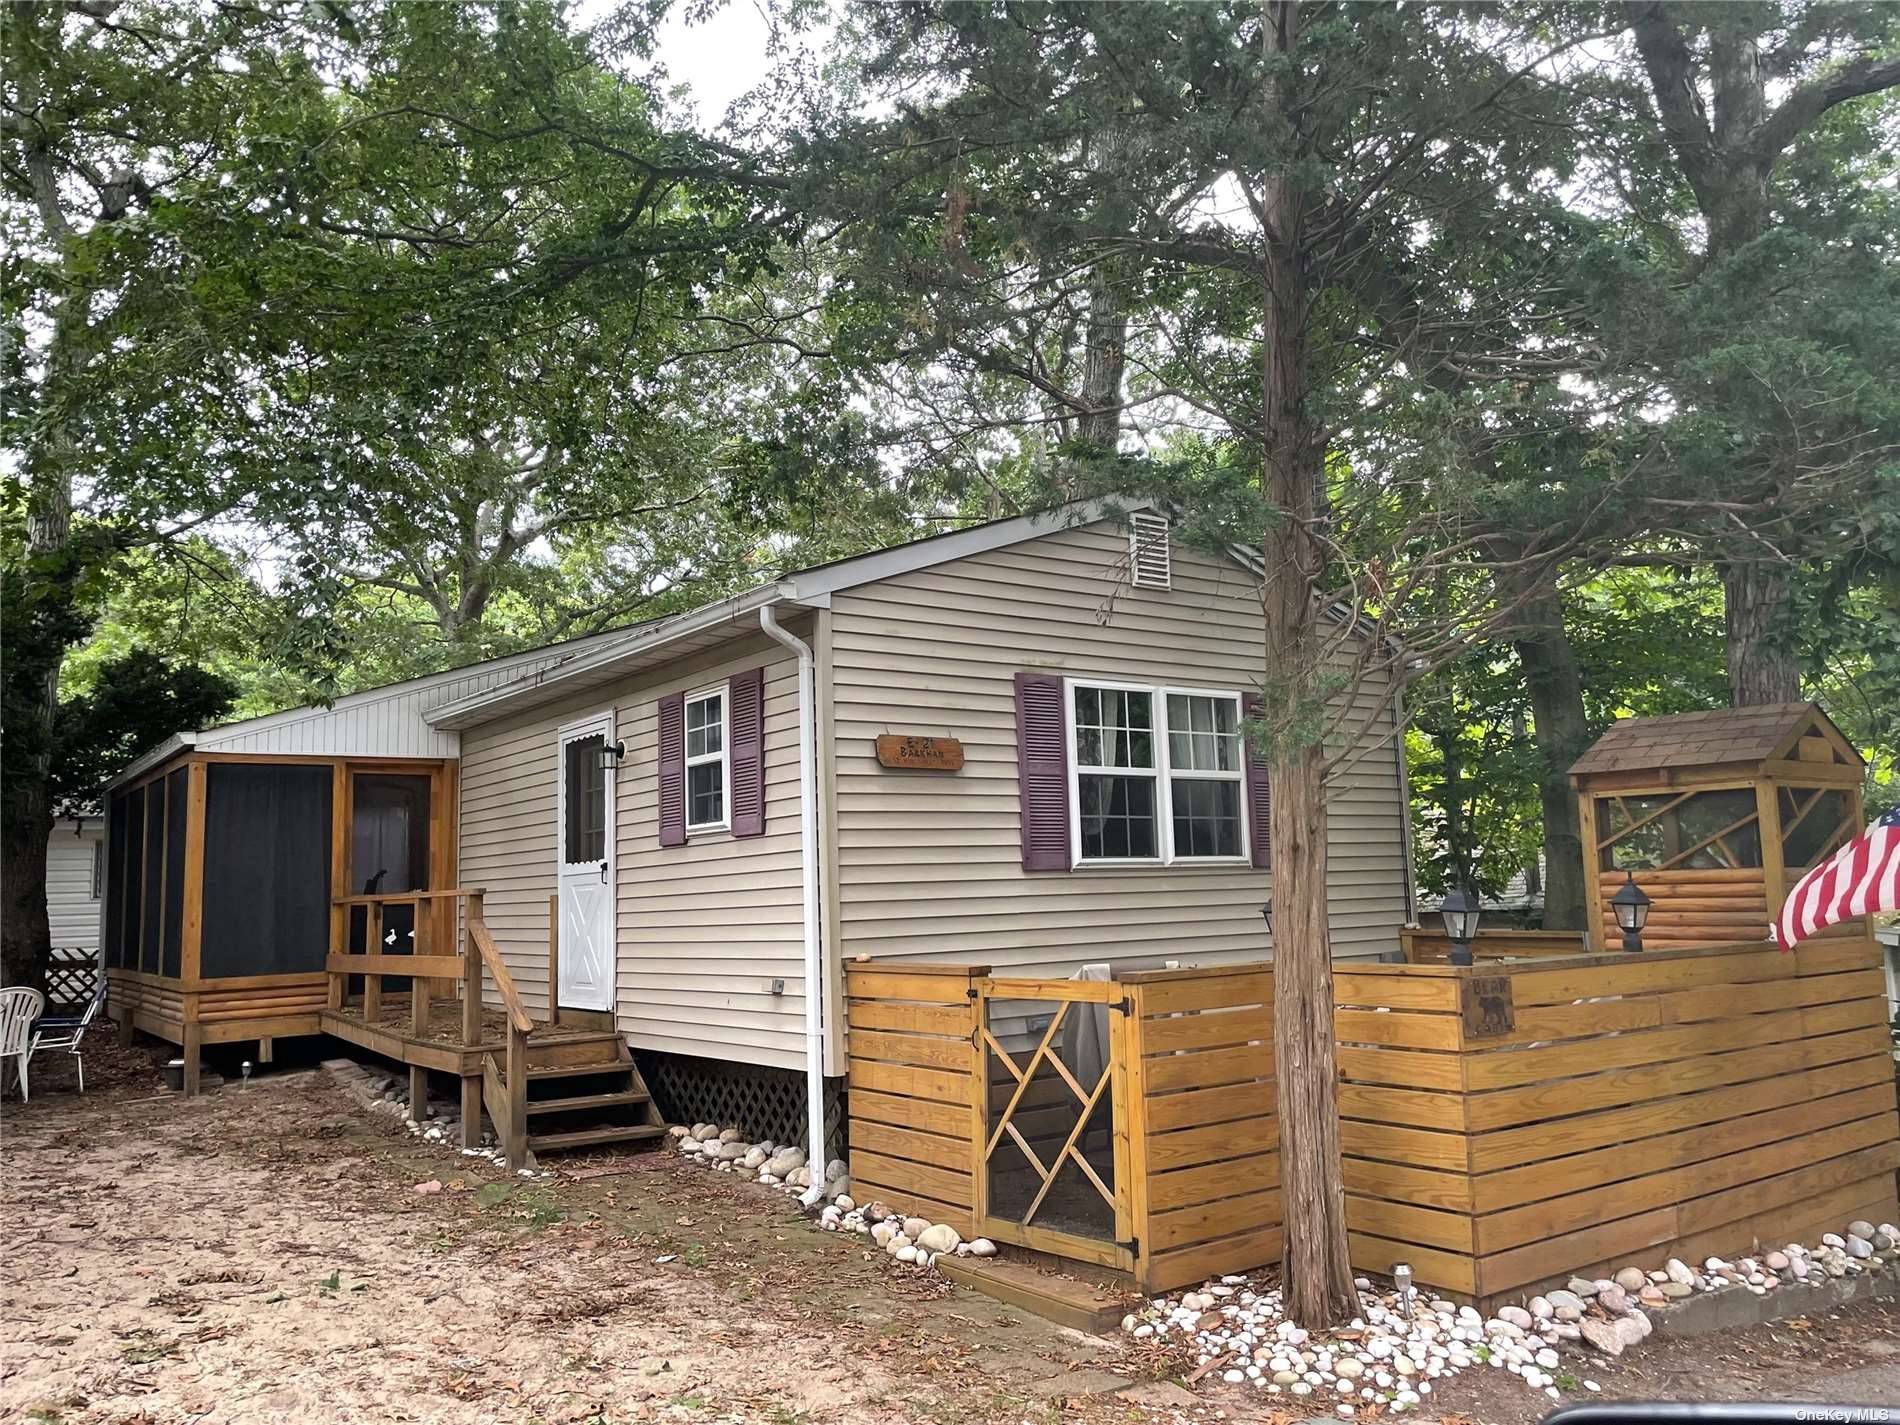 Move in Ready Cottage in Well known Seasonal Beachfront Community called Woodcliff Park Open April 15 October 15.